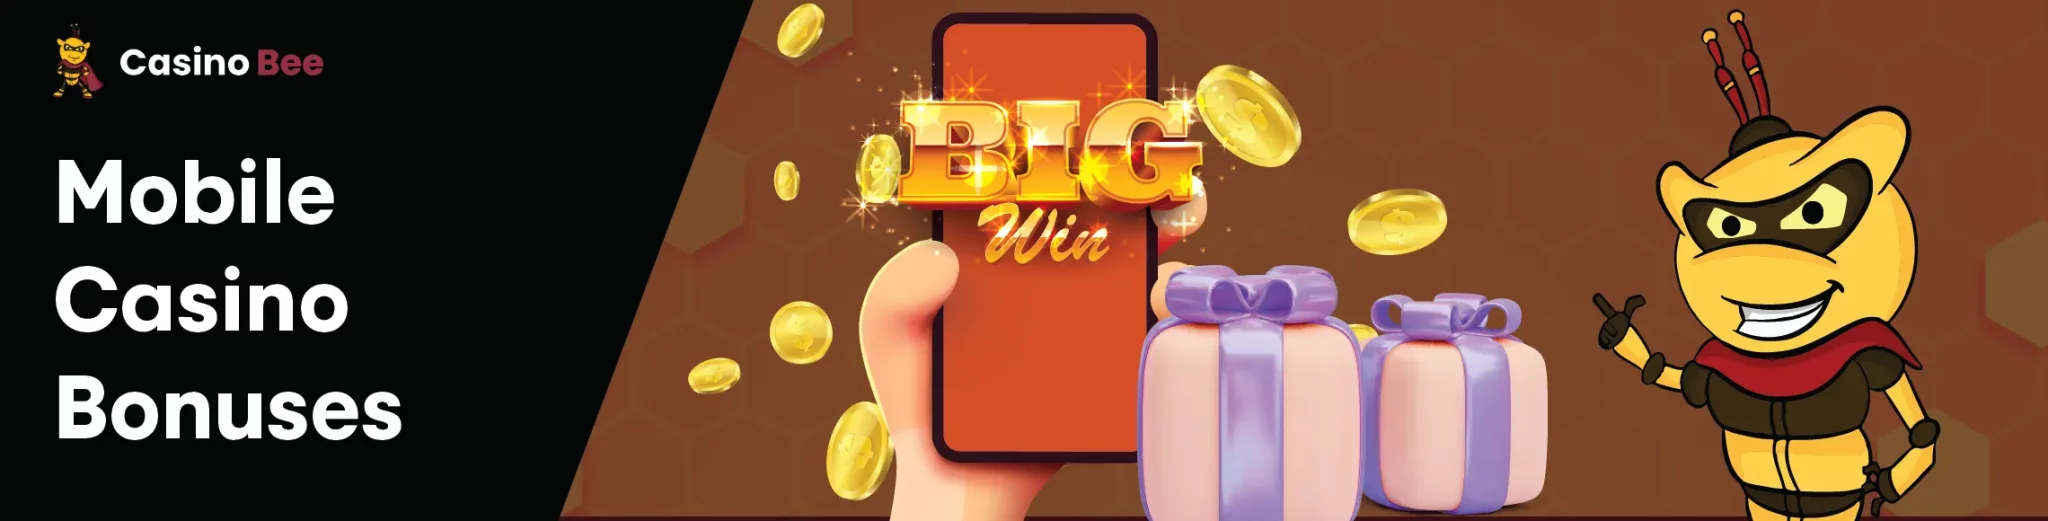 Boost Your Winnings with Mobile Casino Bonuses